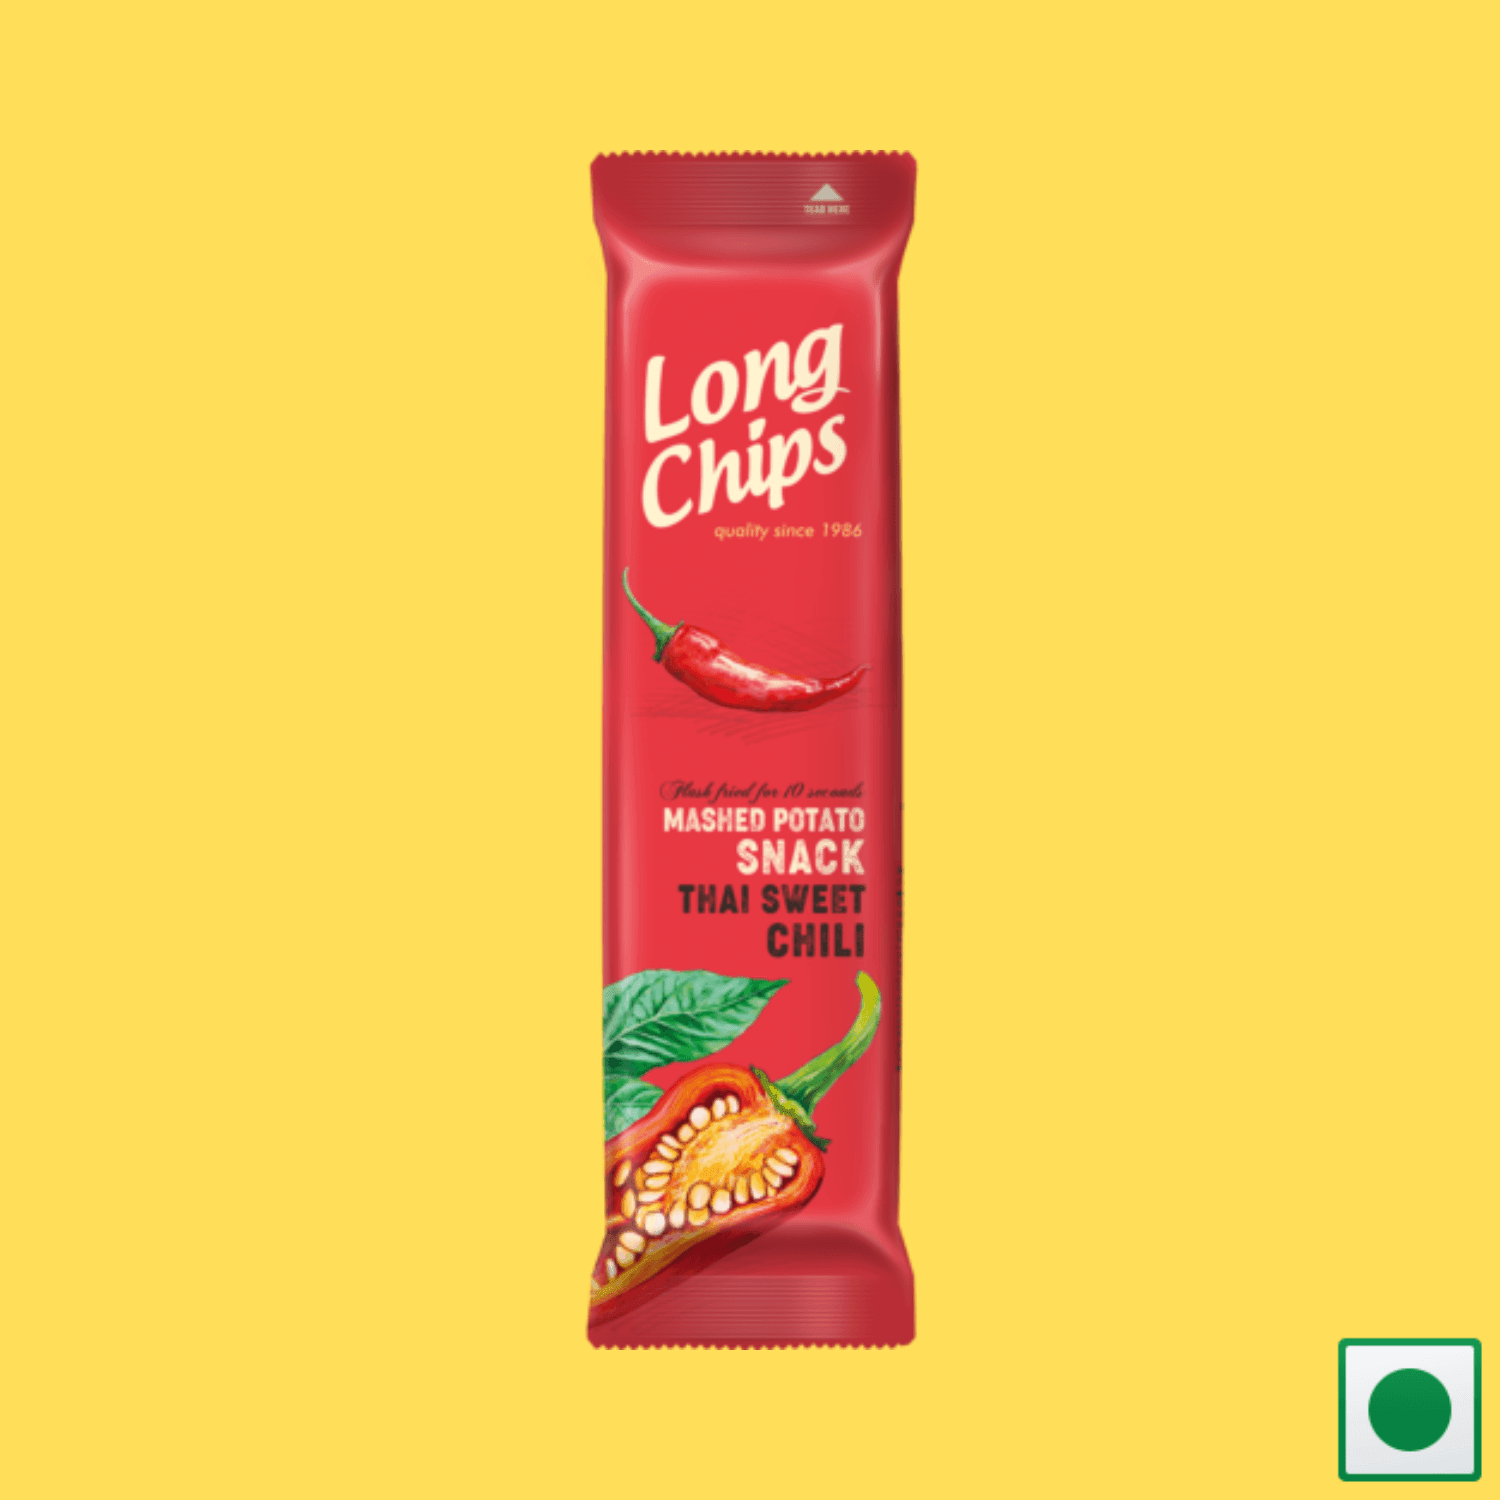 Long Chips Mashed Potato Snack Thai Chili Flavoured, 75g (Imported) - Super 7 Mart